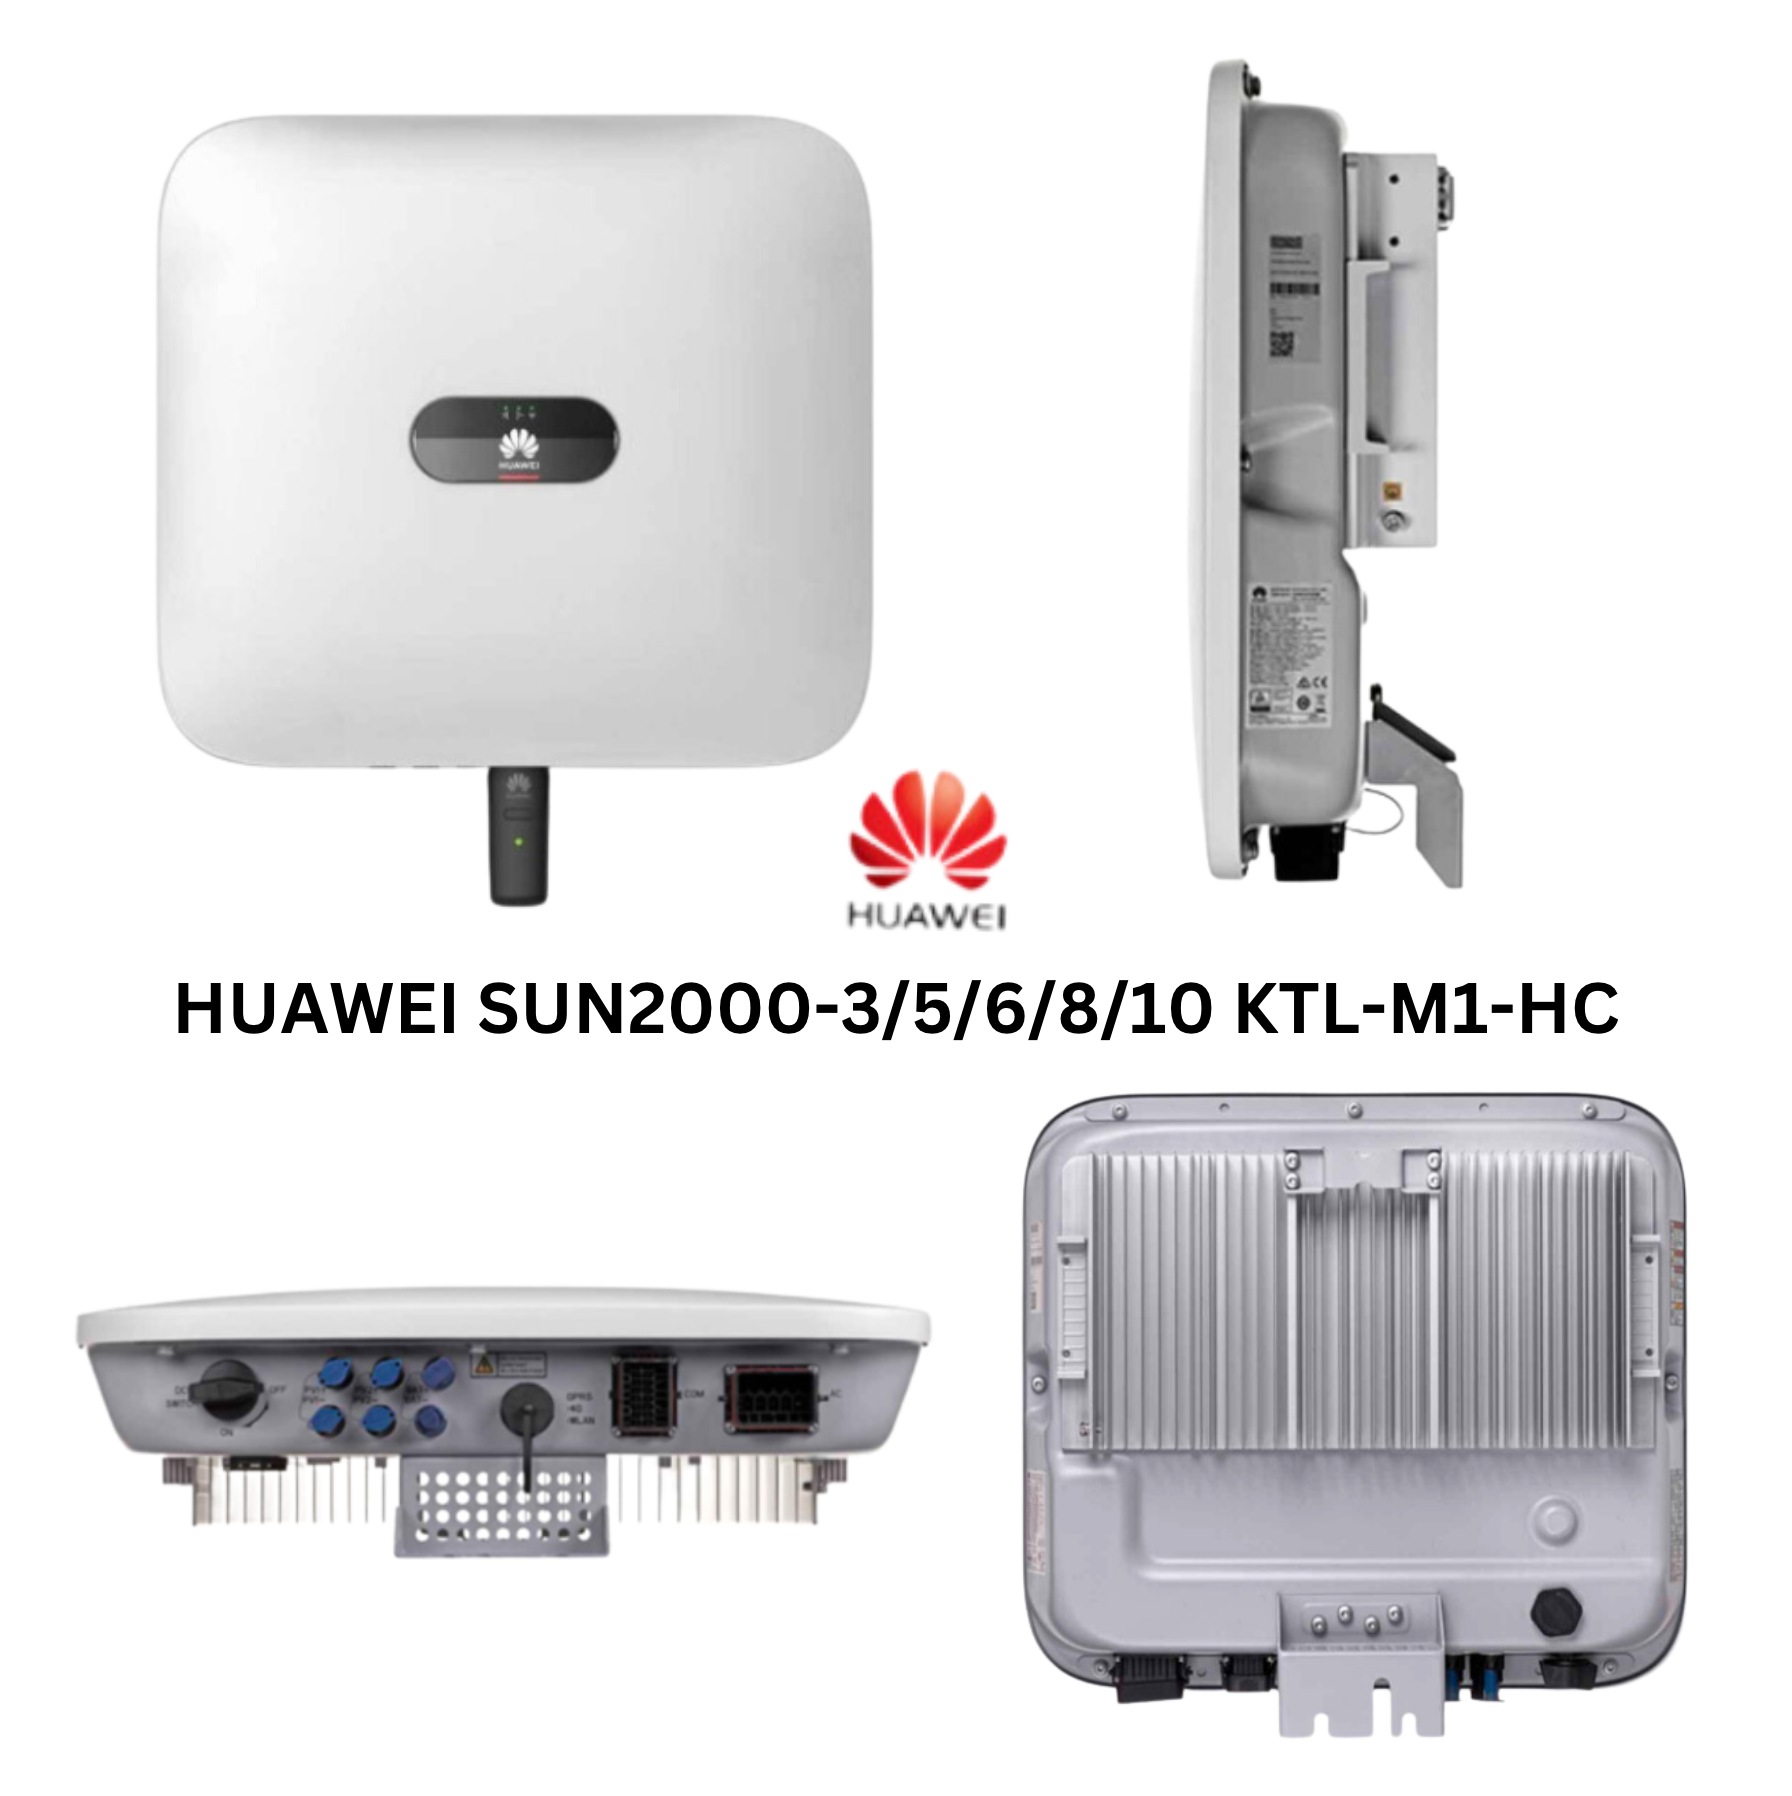 Huawei Complete PV Set - [Without Energy Storage]